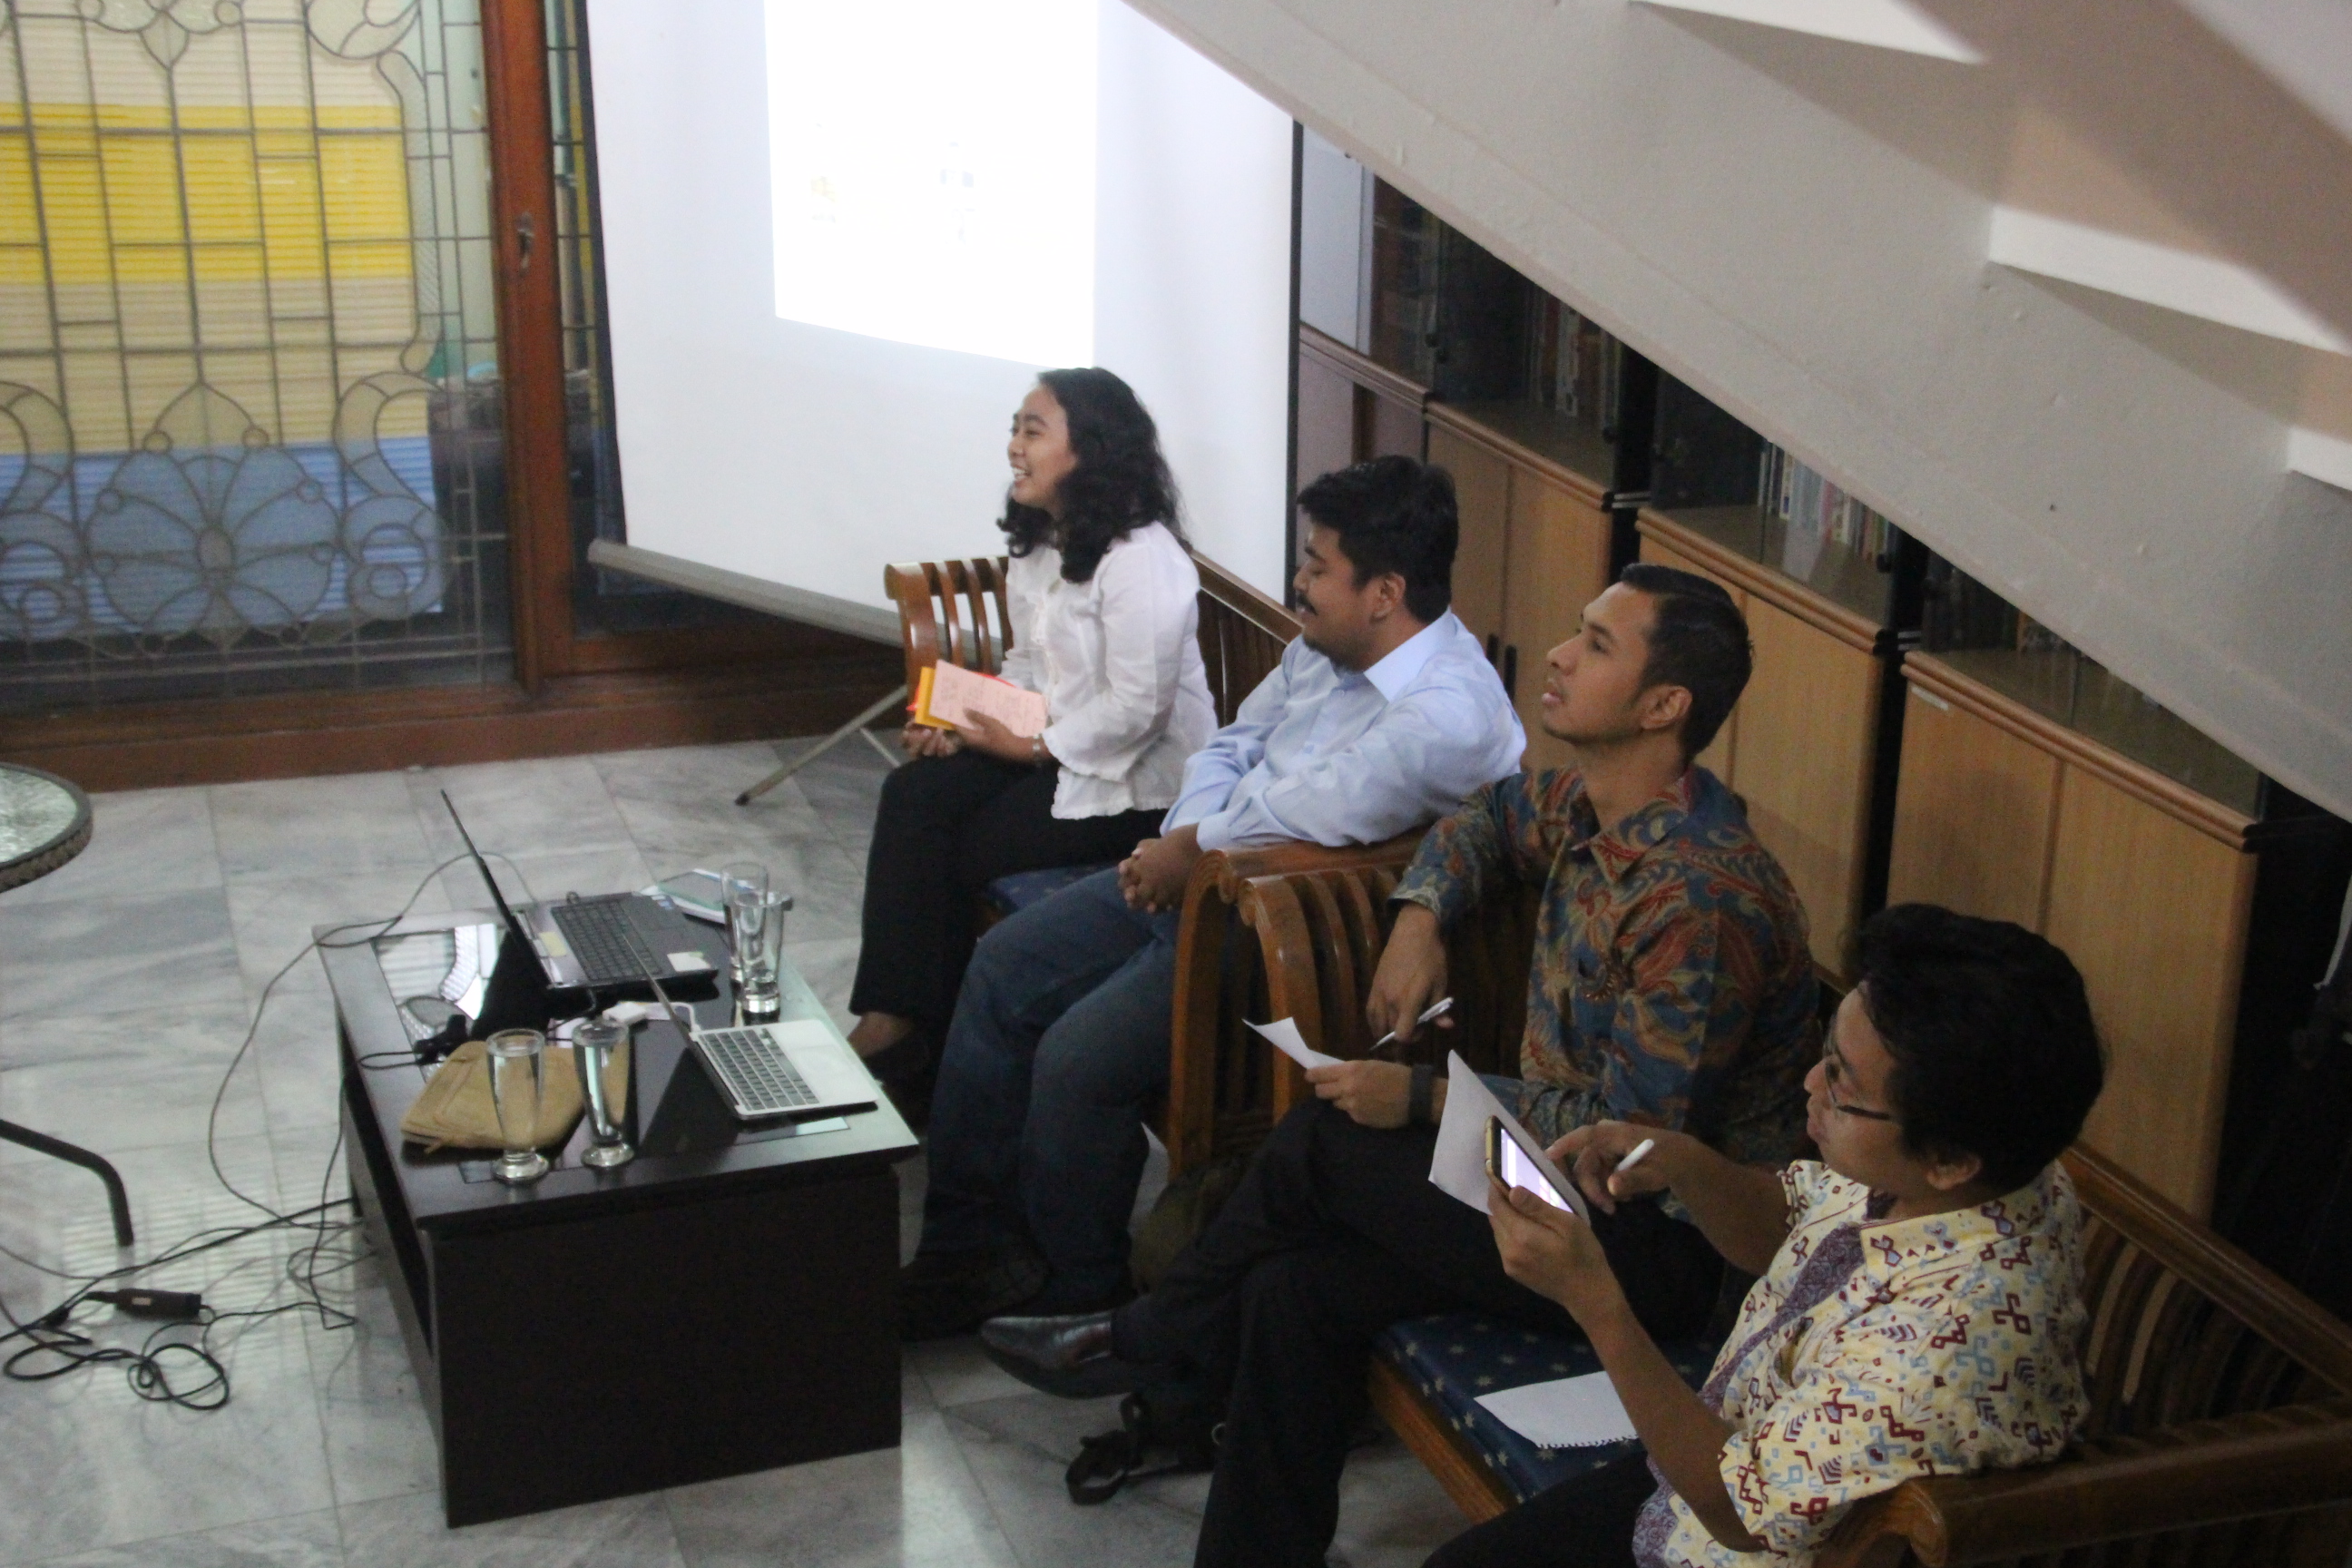 Replikasi IAF : Open Borders and Migration Policy in Indonesia